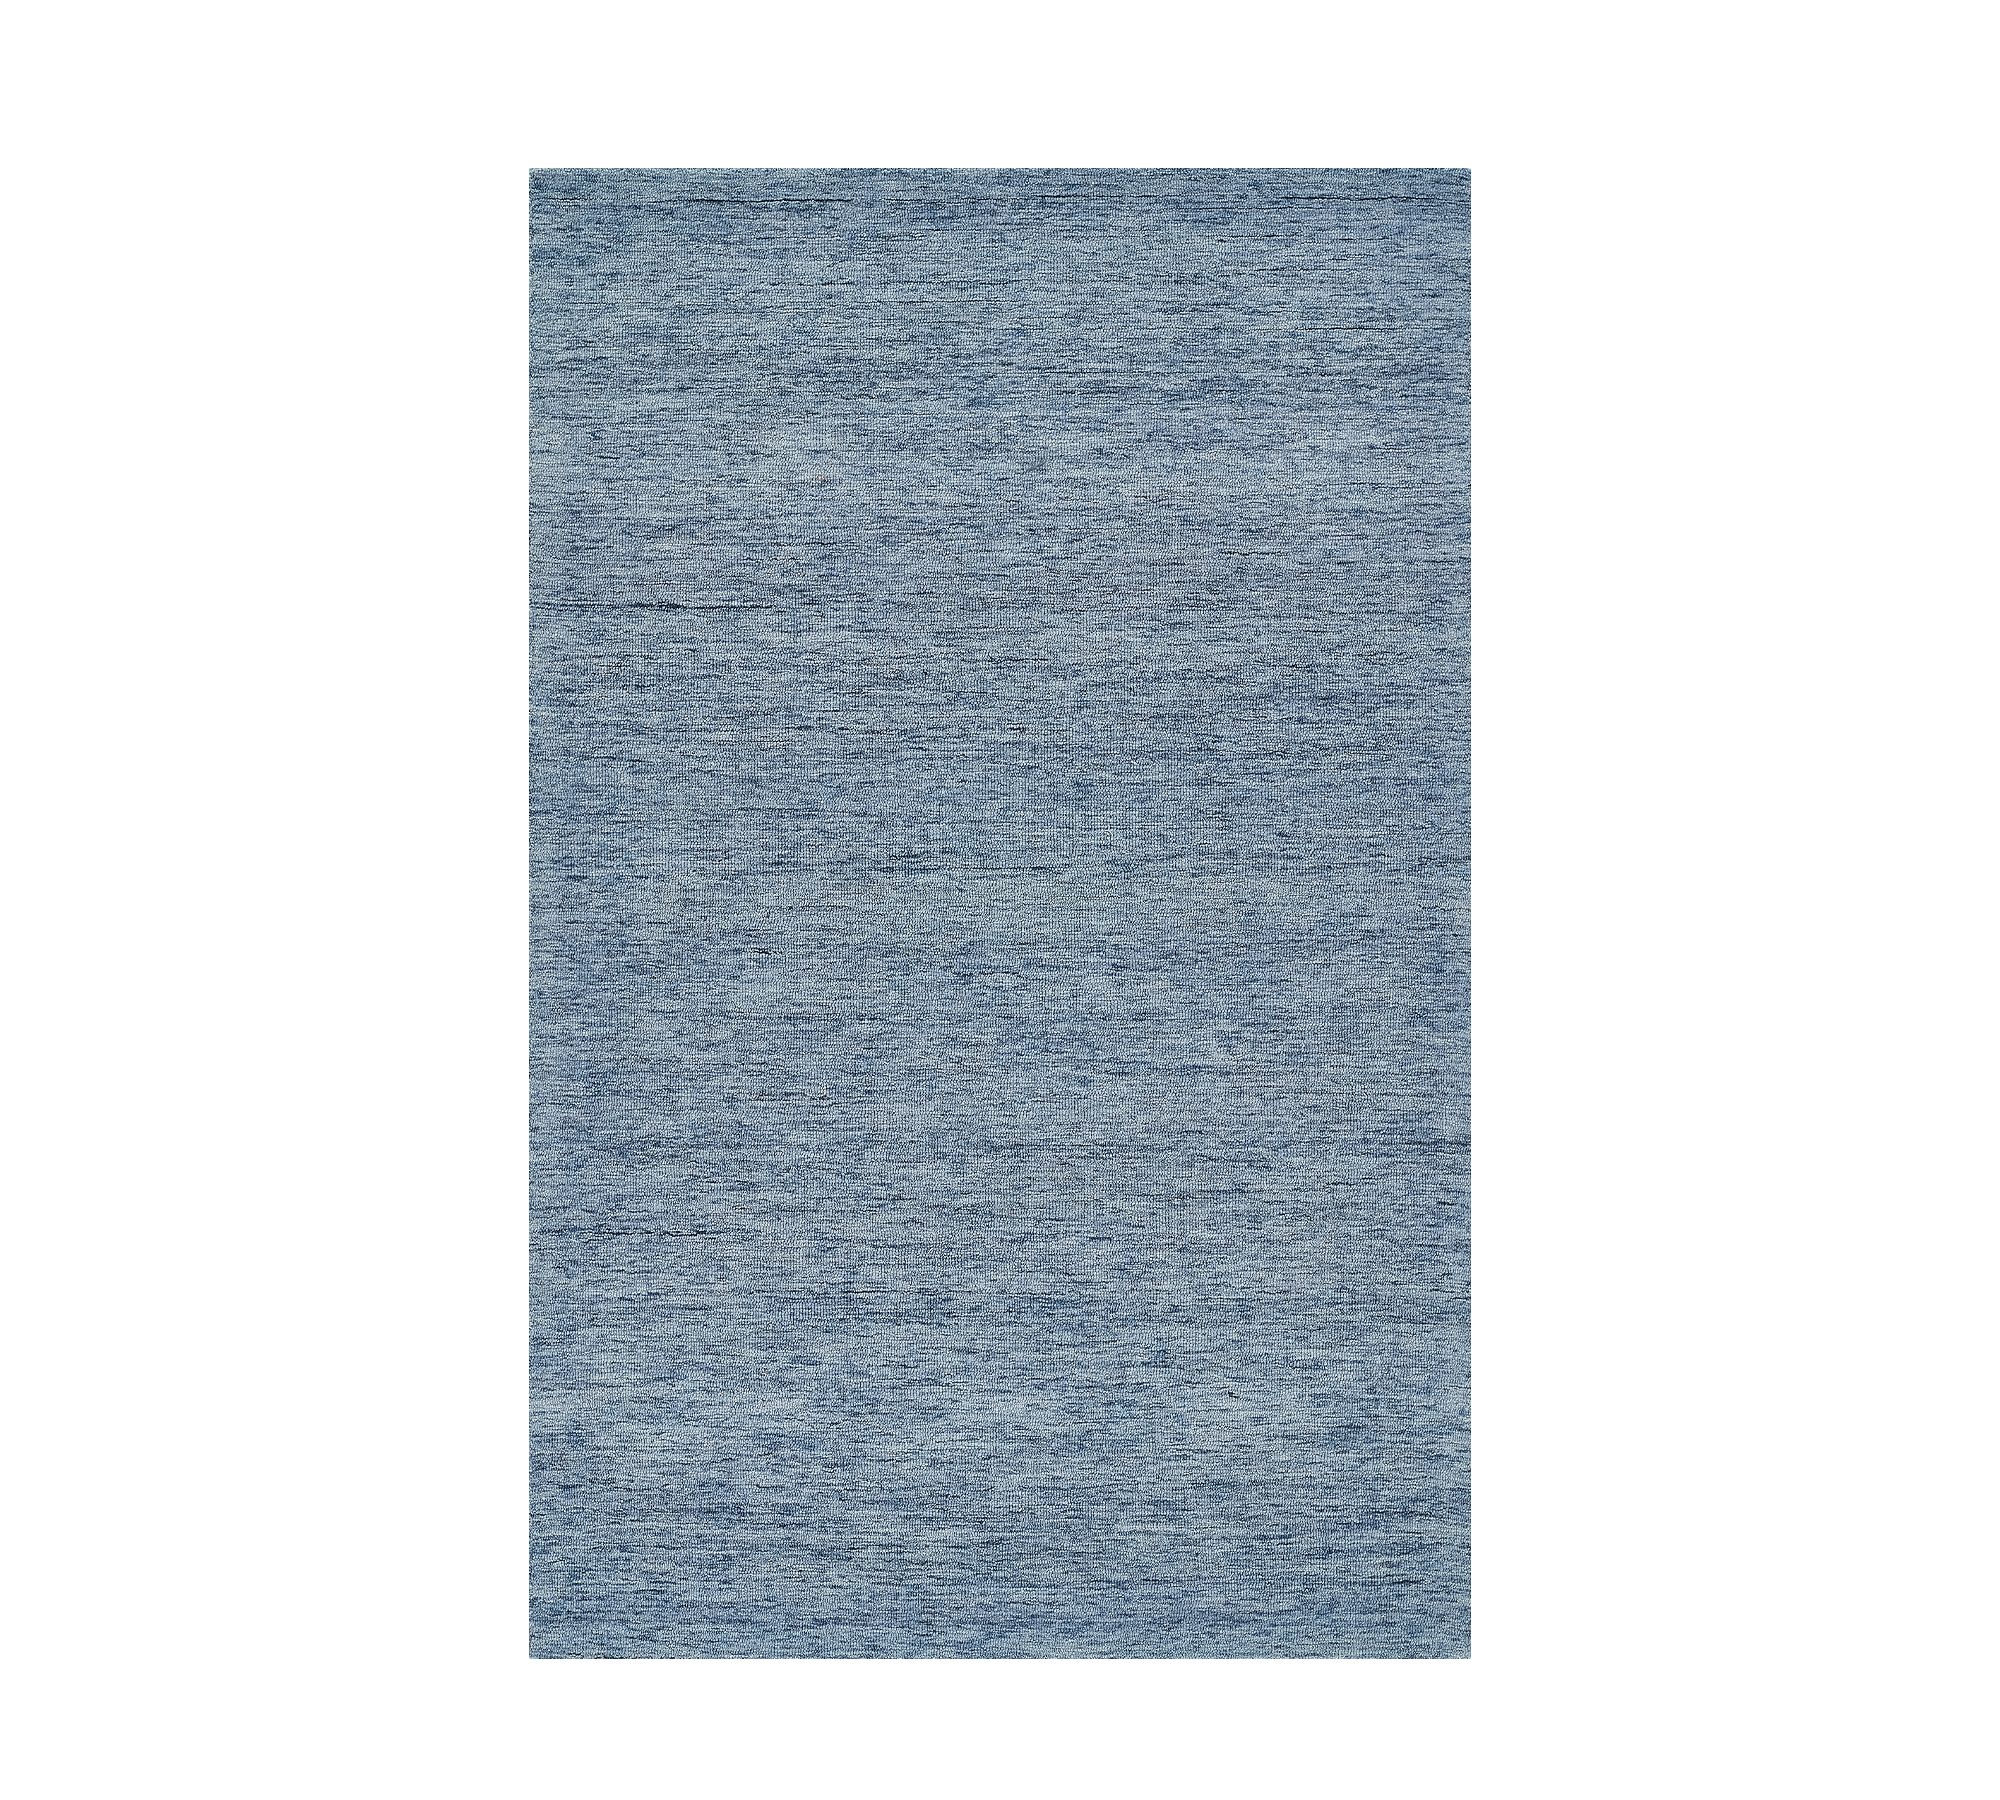 Roley Hand-Tufted Wool Rug